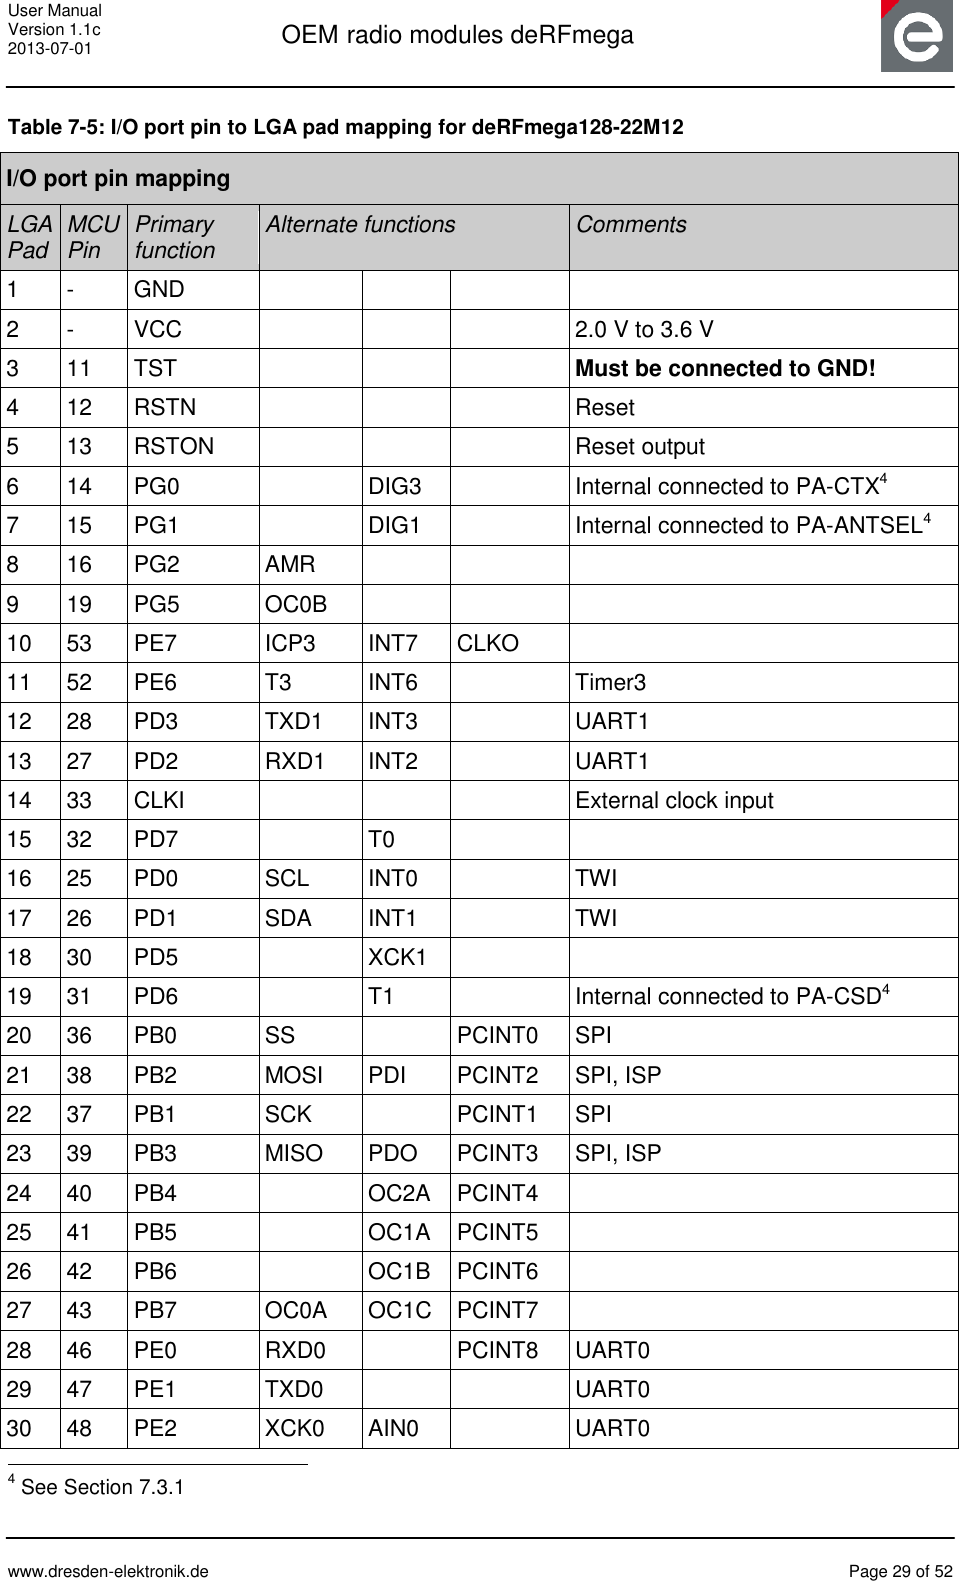 User Manual Version 1.1c 2013-07-01  OEM radio modules deRFmega      www.dresden-elektronik.de  Page 29 of 52  Table 7-5: I/O port pin to LGA pad mapping for deRFmega128-22M12 I/O port pin mapping LGA Pad MCU Pin Primary function Alternate functions  Comments 1 - GND     2 - VCC    2.0 V to 3.6 V 3 11 TST    Must be connected to GND! 4 12 RSTN    Reset 5 13 RSTON    Reset output 6 14 PG0  DIG3  Internal connected to PA-CTX4 7 15 PG1  DIG1  Internal connected to PA-ANTSEL4 8 16 PG2 AMR    9 19 PG5 OC0B    10 53 PE7 ICP3 INT7 CLKO  11 52 PE6 T3 INT6  Timer3 12 28 PD3 TXD1 INT3  UART1 13 27 PD2 RXD1 INT2  UART1 14 33 CLKI    External clock input 15 32 PD7  T0   16 25 PD0 SCL INT0  TWI 17 26 PD1 SDA INT1  TWI 18 30 PD5  XCK1   19 31 PD6  T1  Internal connected to PA-CSD4 20 36 PB0 SS  PCINT0 SPI 21 38 PB2 MOSI PDI PCINT2 SPI, ISP 22 37 PB1 SCK  PCINT1 SPI 23 39 PB3 MISO PDO PCINT3 SPI, ISP 24 40 PB4  OC2A PCINT4  25 41 PB5  OC1A PCINT5  26 42 PB6   OC1B PCINT6  27 43 PB7 OC0A OC1C PCINT7  28 46 PE0 RXD0  PCINT8 UART0 29 47 PE1 TXD0   UART0 30 48 PE2 XCK0 AIN0  UART0                                                 4 See Section 7.3.1 